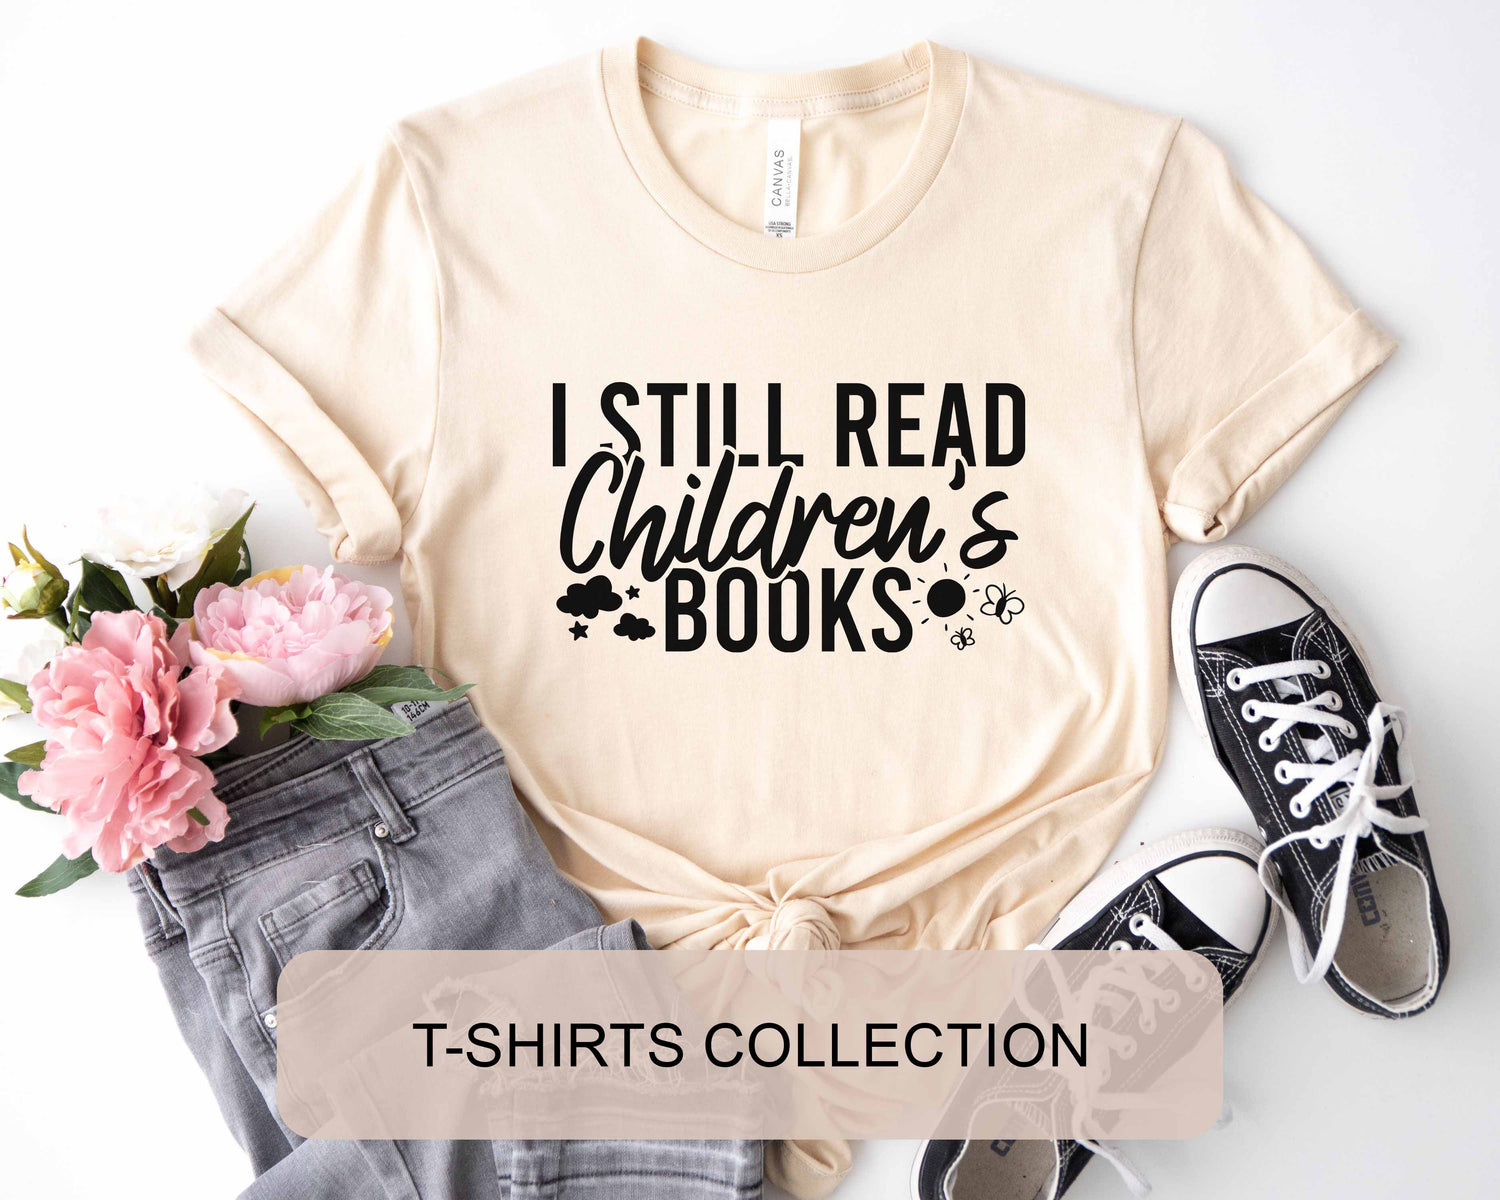 A natural color shirt with the saying "I still read children's books"